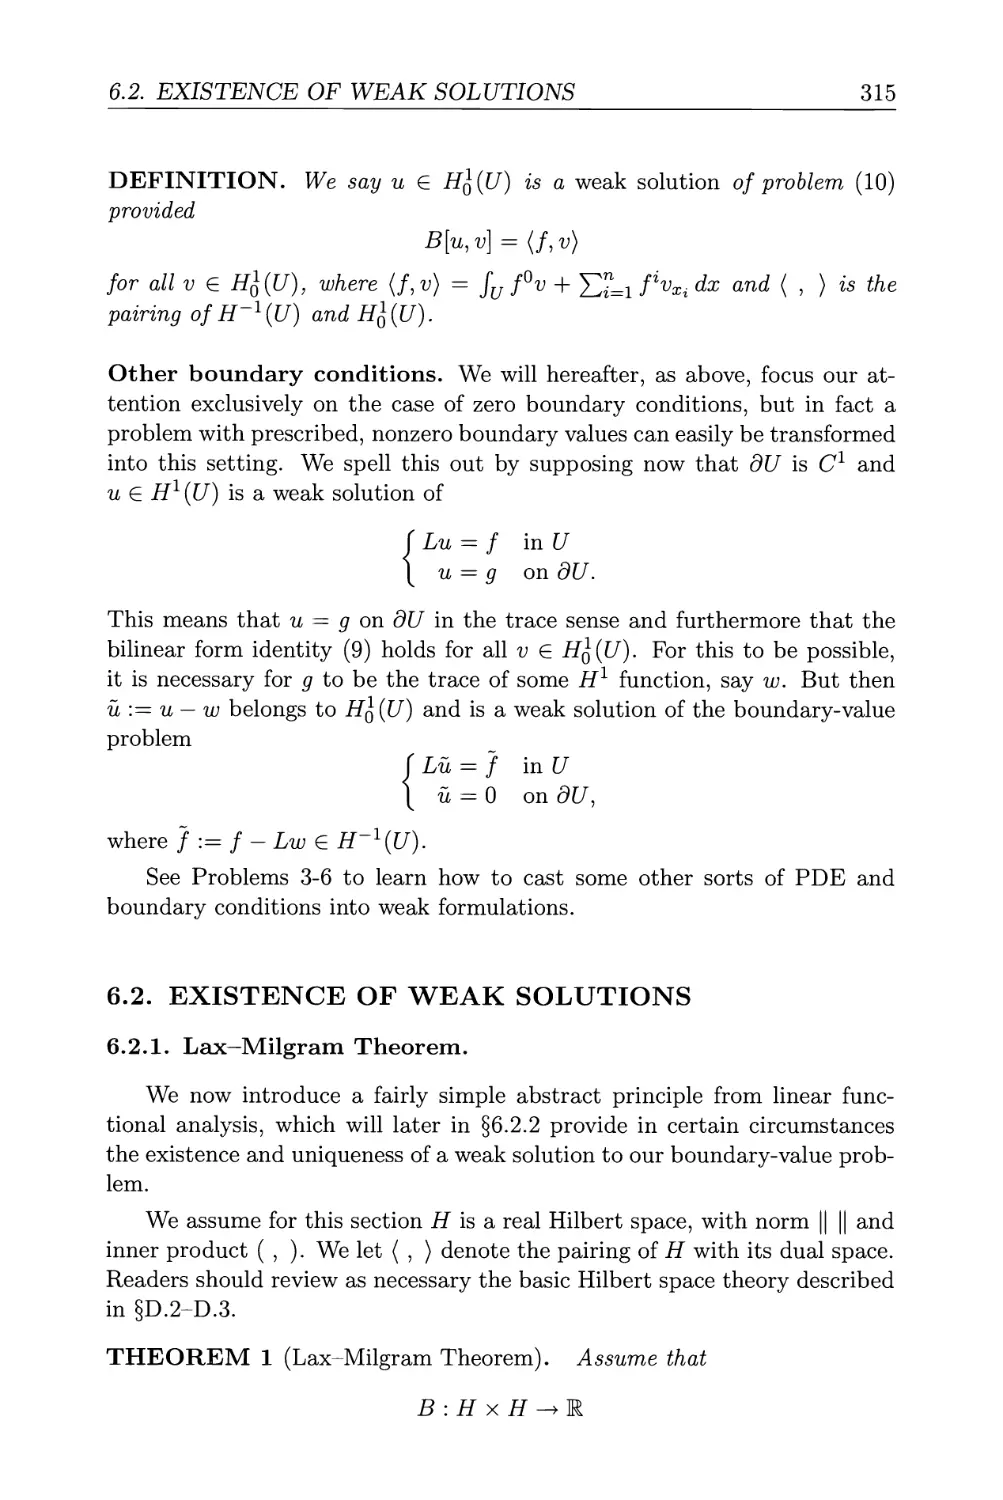 6.2. Existence of weak solutions